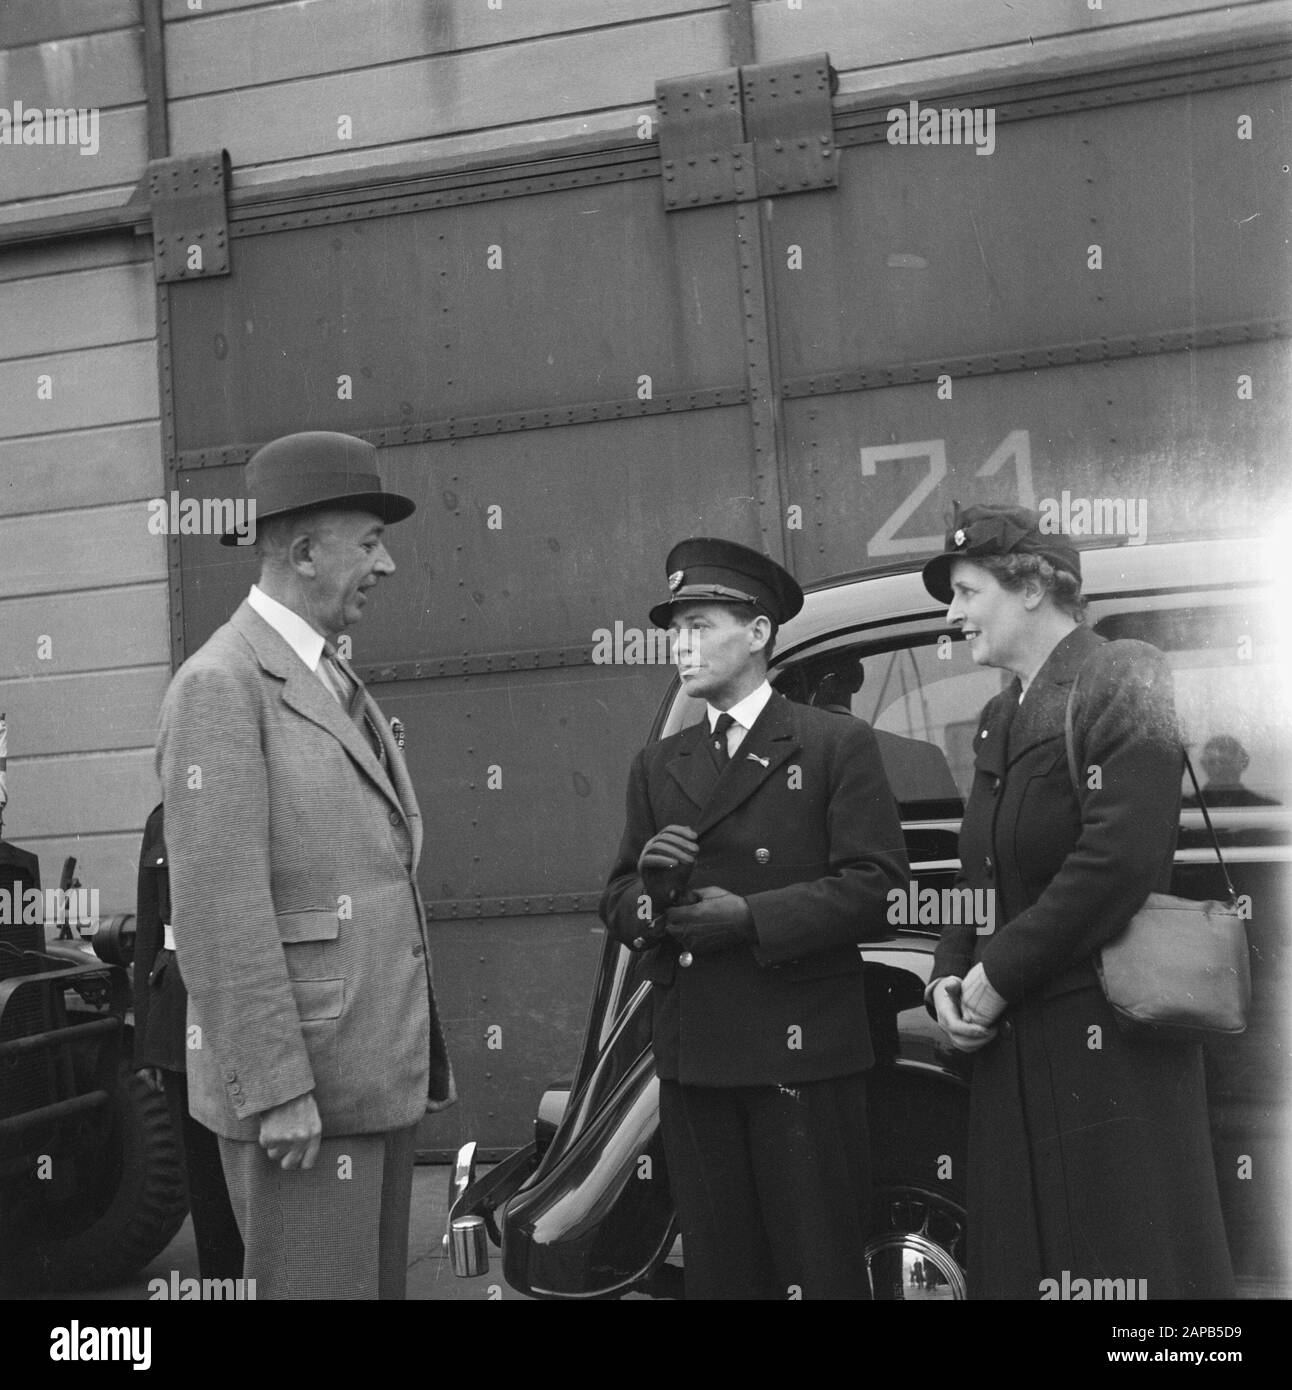 Diplomacy: English ambassador Description: Arrival of the English envoy Sir Neville Bland at the Lloydskade in Rotterdam. Sir Neville Bland and wife met their old driver L.P. Luit, who had the Ambassador's car in hiding and stayed in the Netherlands Date: May 25, 1945 Location: Rotterdam, Zuid-Holland Keywords: cars, drivers, diplomats, diplomats, Second World War Personal name: Bland, Neville, Luit, L.P. Stock Photo